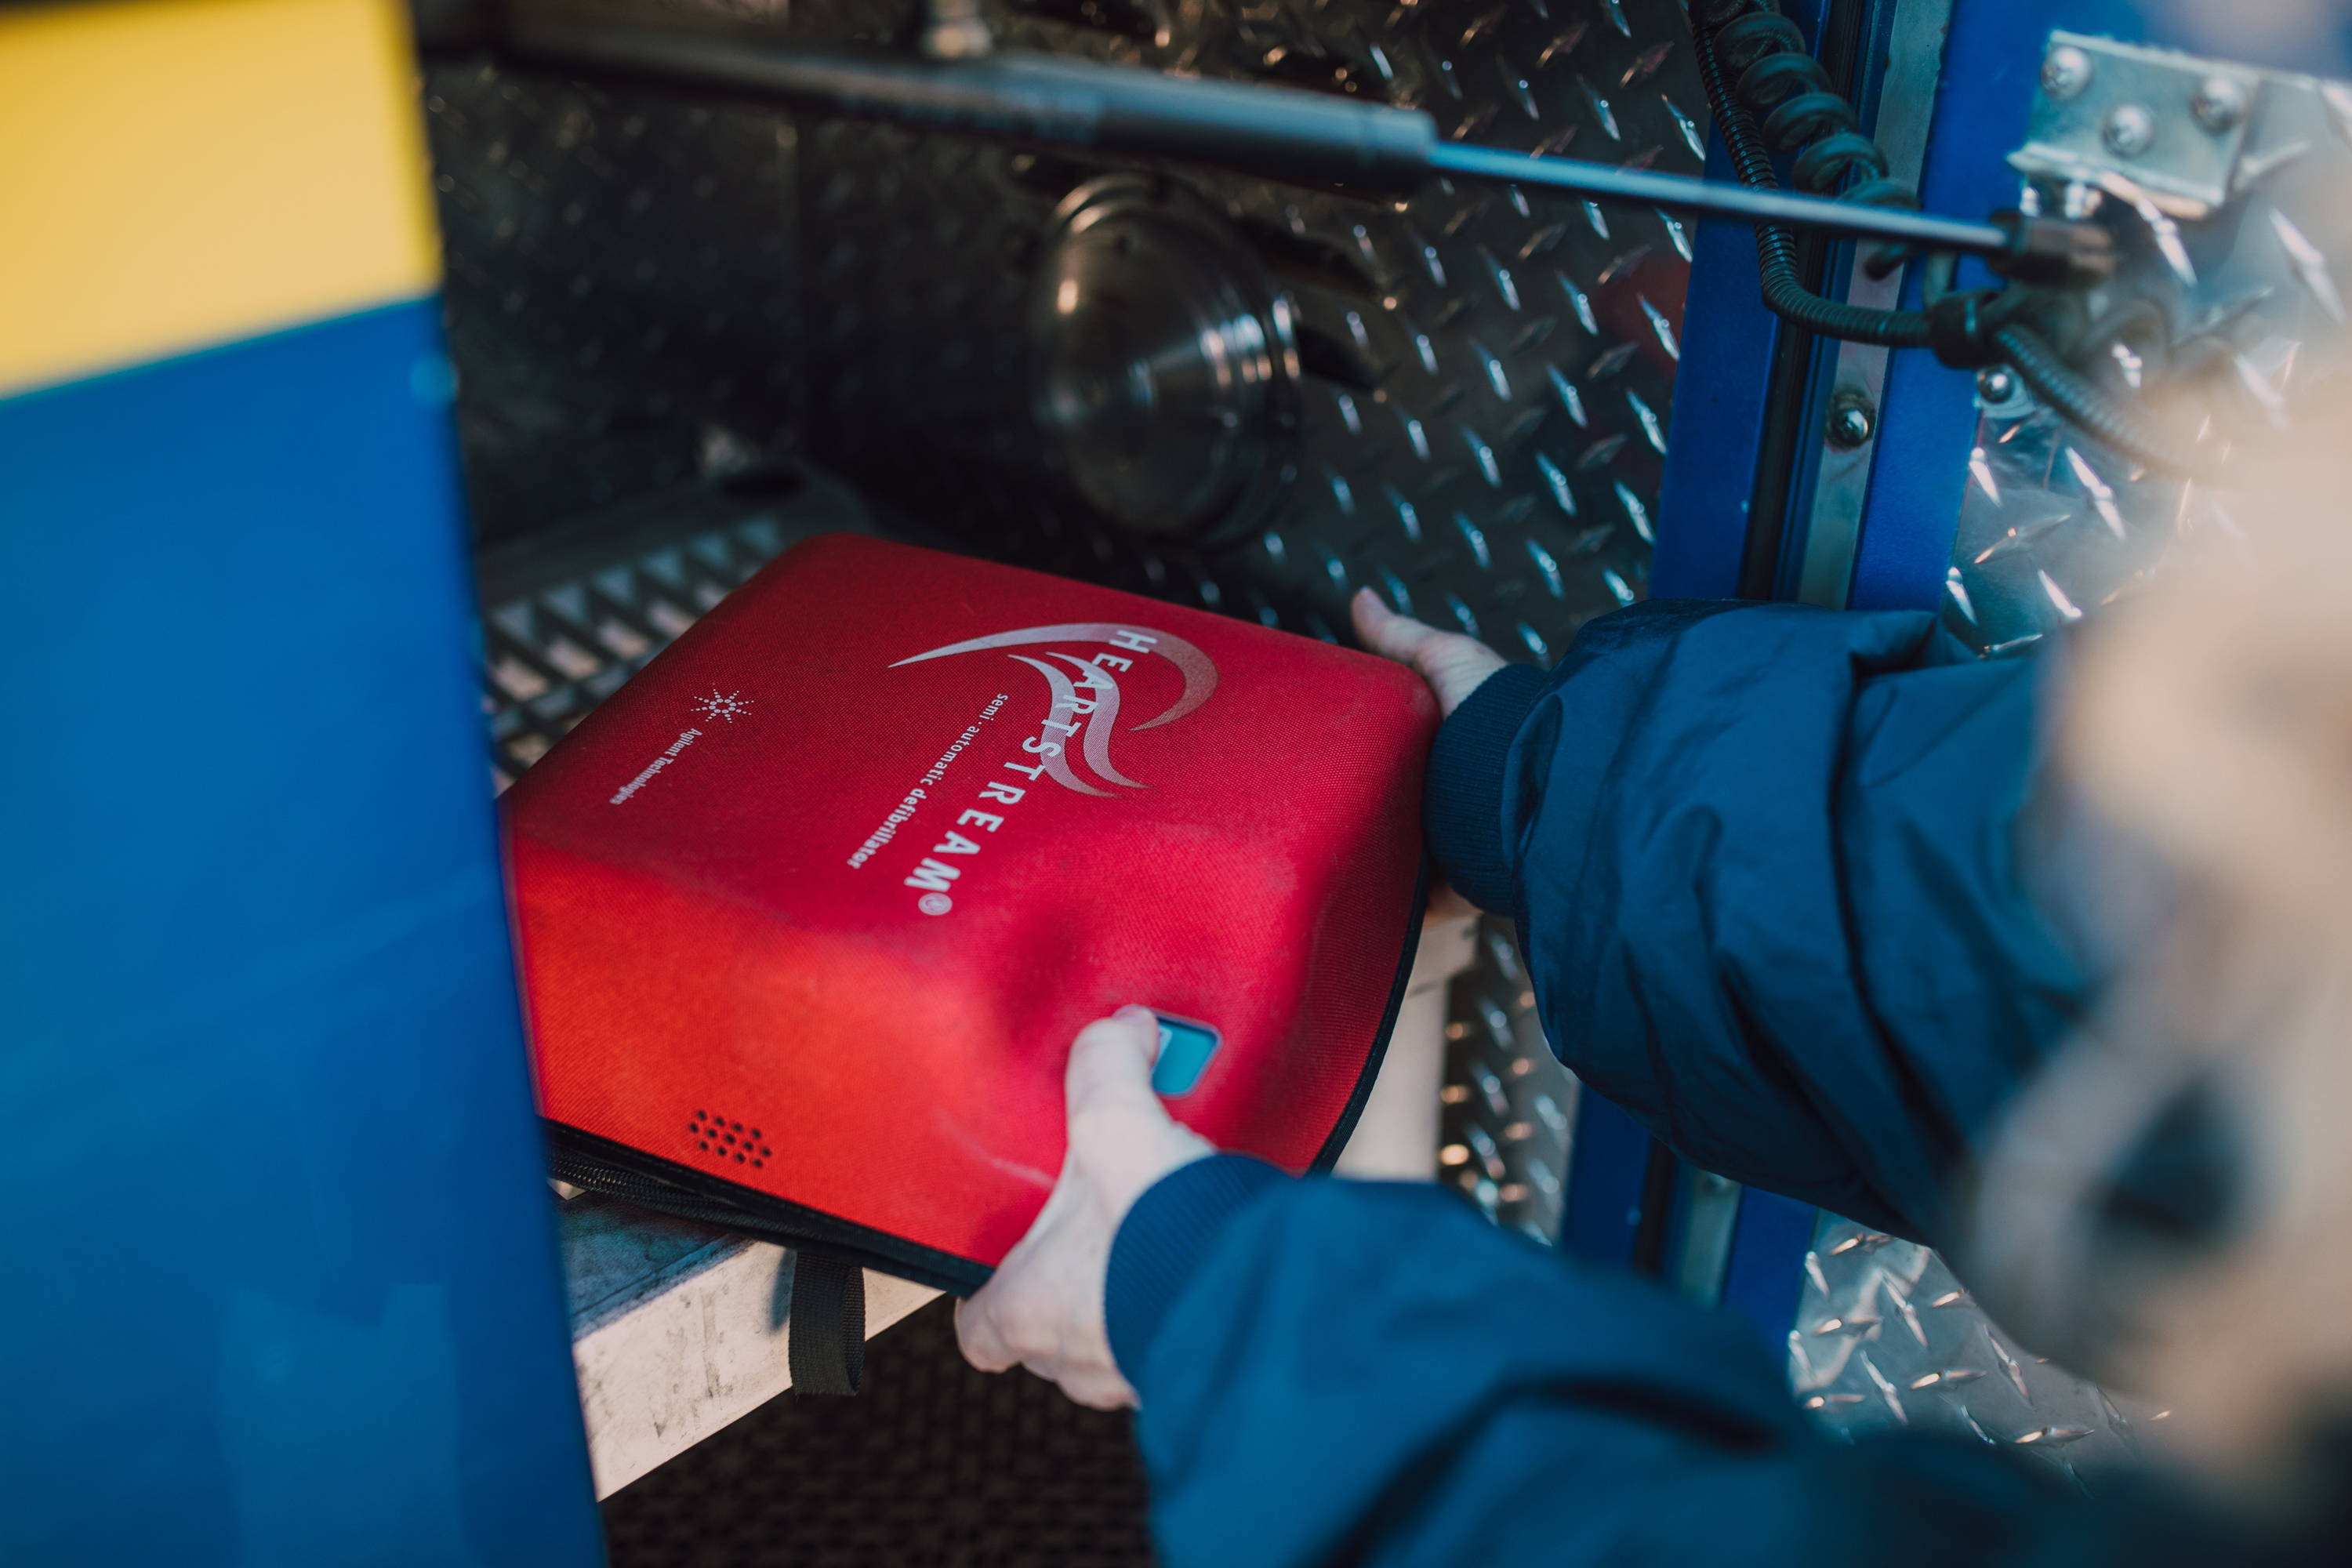 Automated External Defibrillator being retrieved from storage